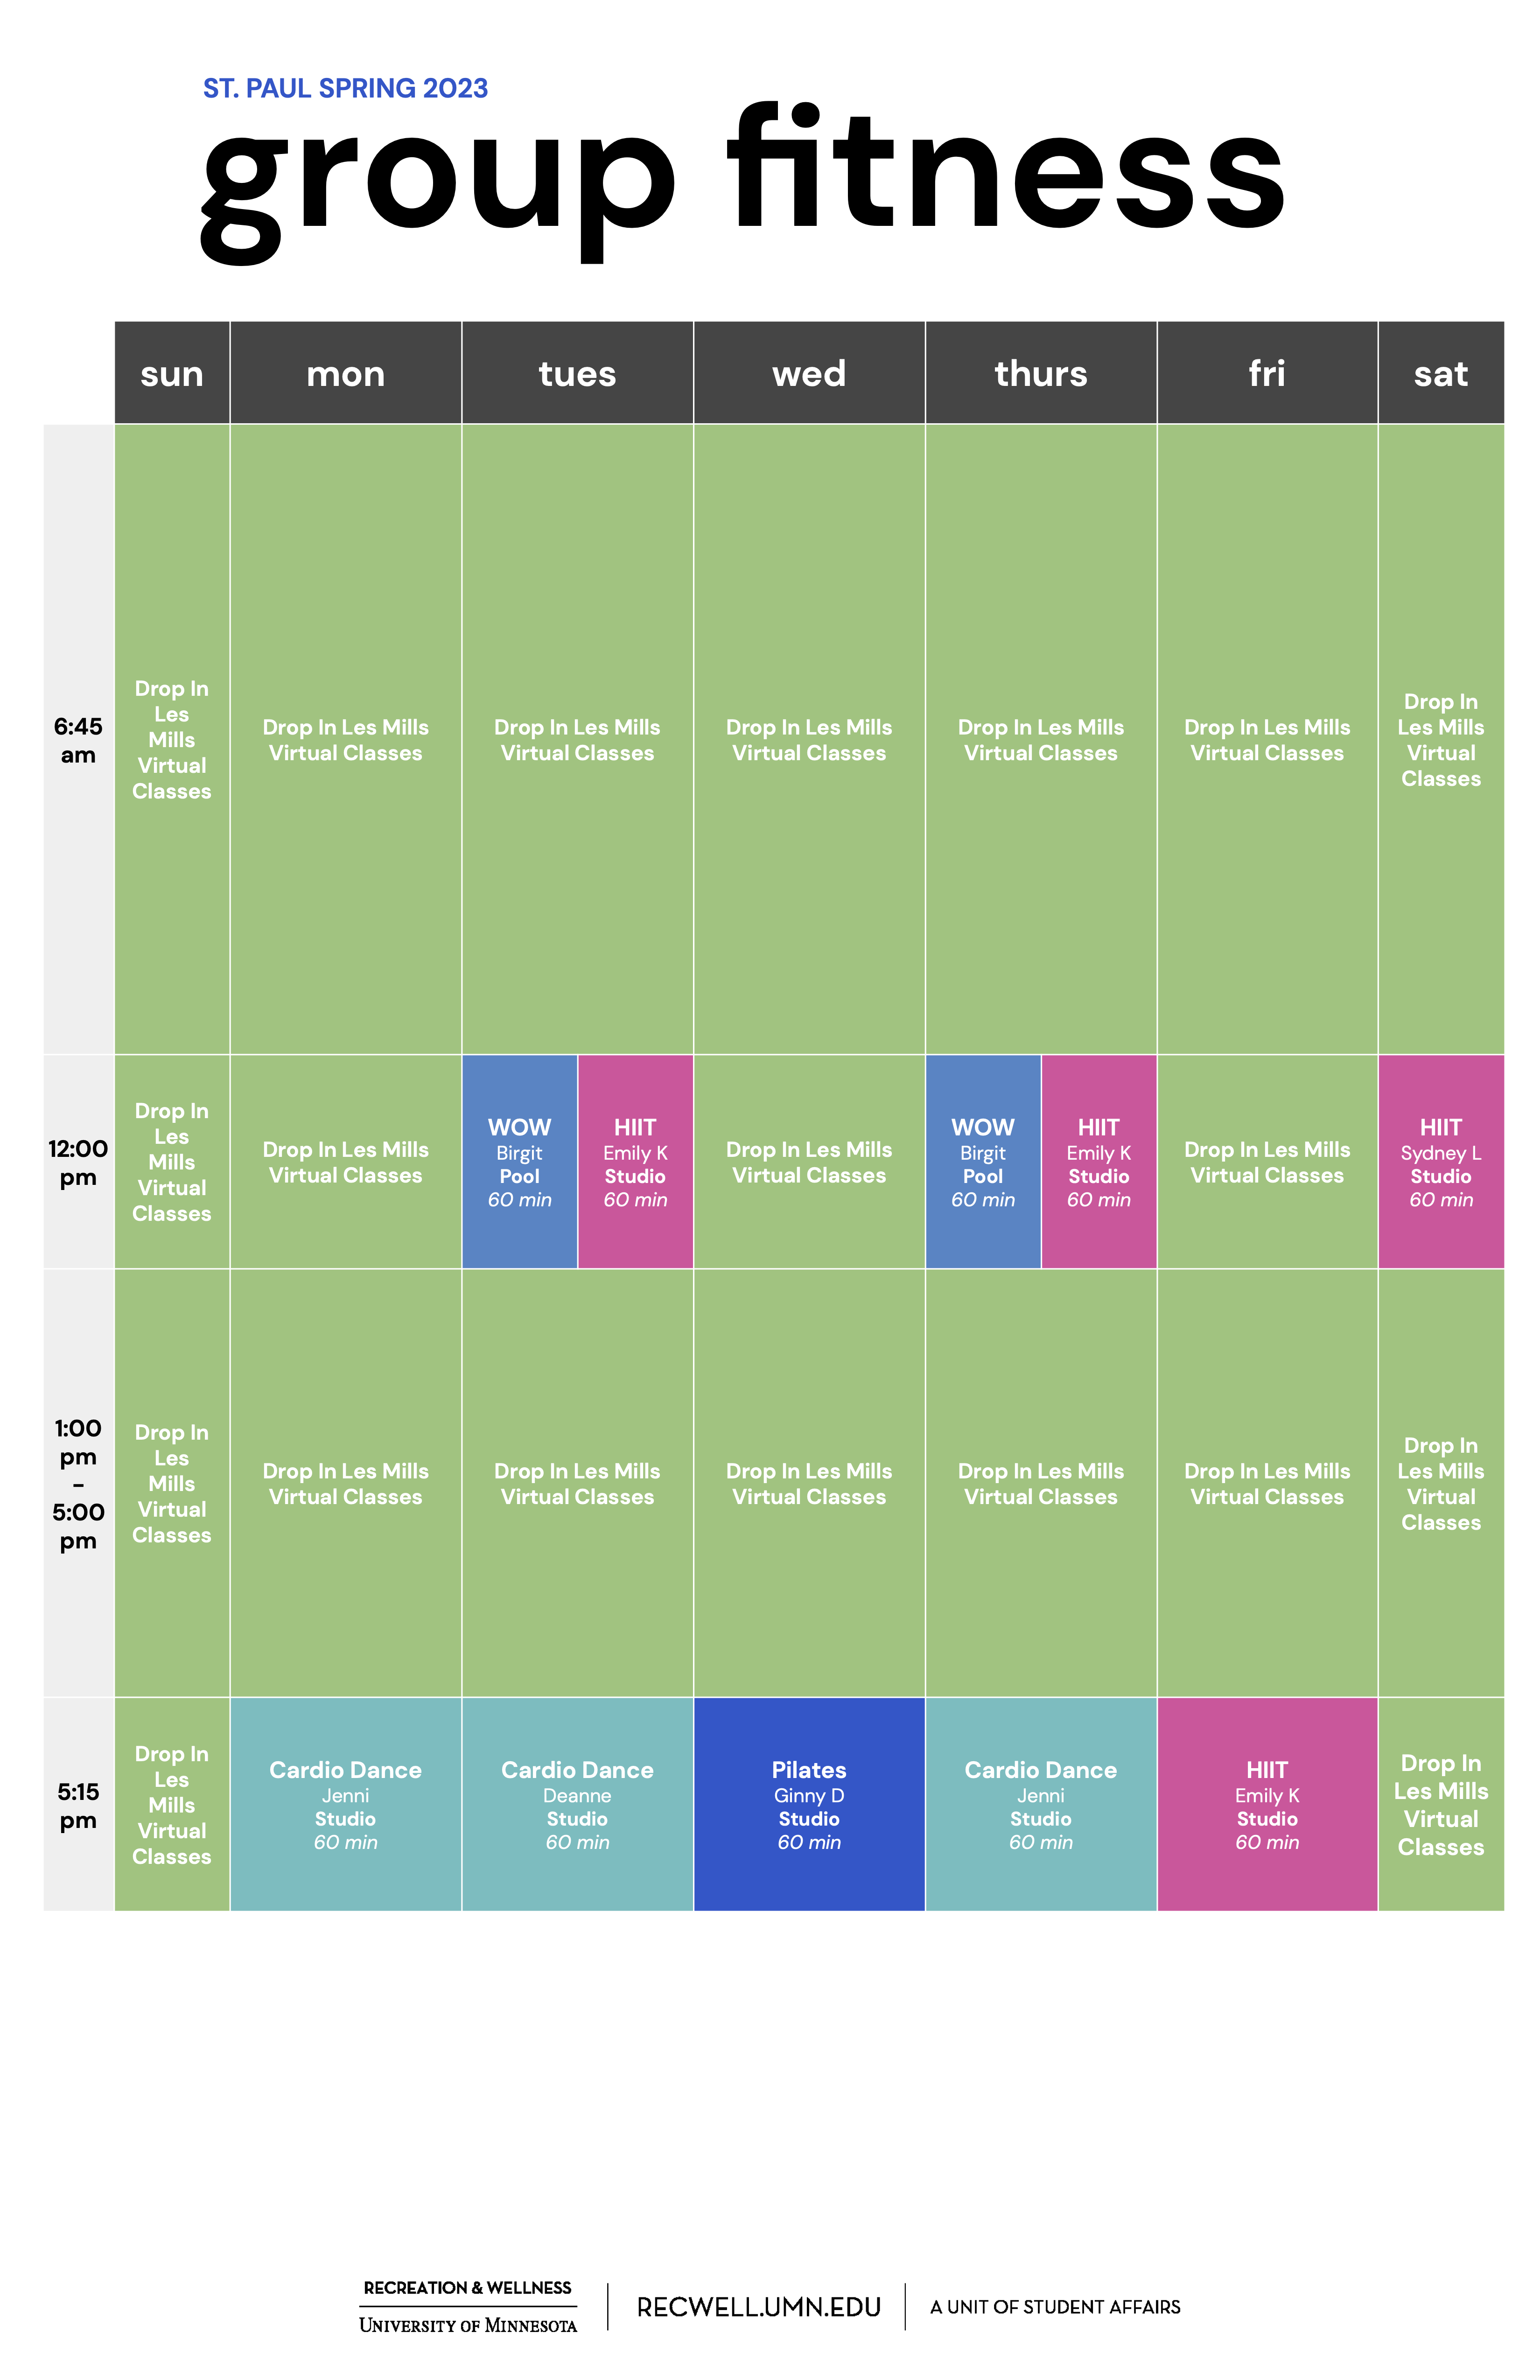 graphic schedule of the st. paul gym group fitness schedule for spring 2023